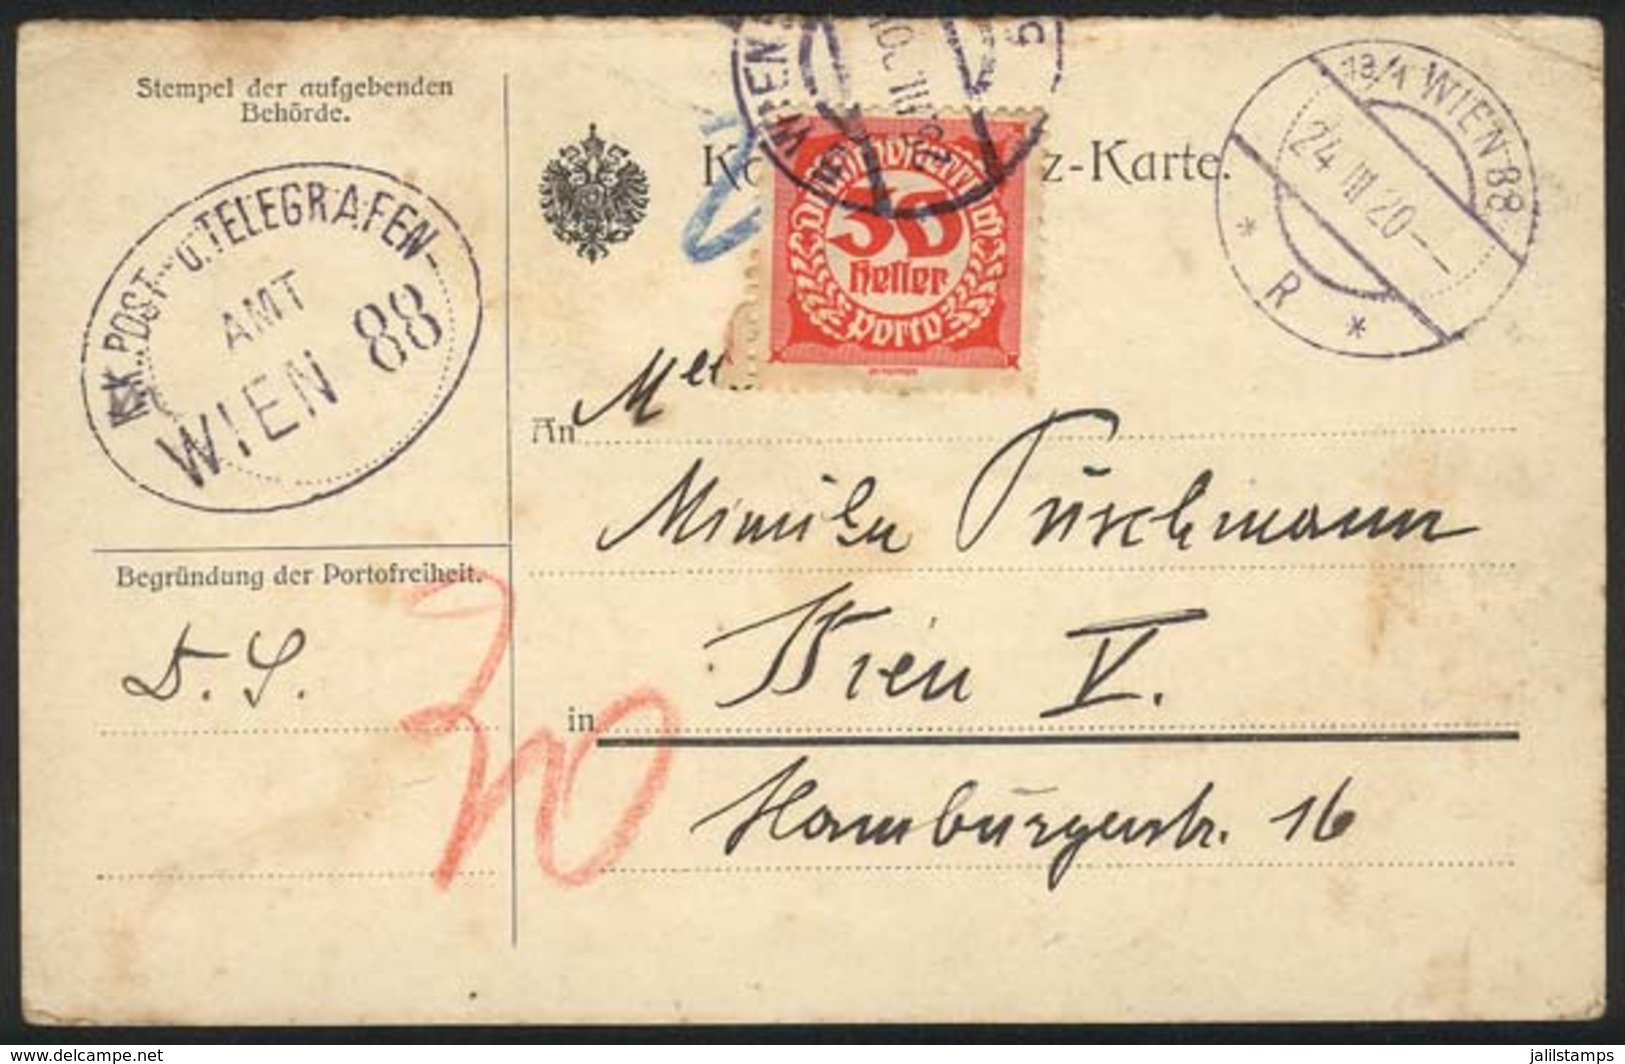 AUSTRIA: Card Used In Wien On 24/MAR/1920, With Postage Due Stamp Of 30h., VF Quality! - Covers & Documents